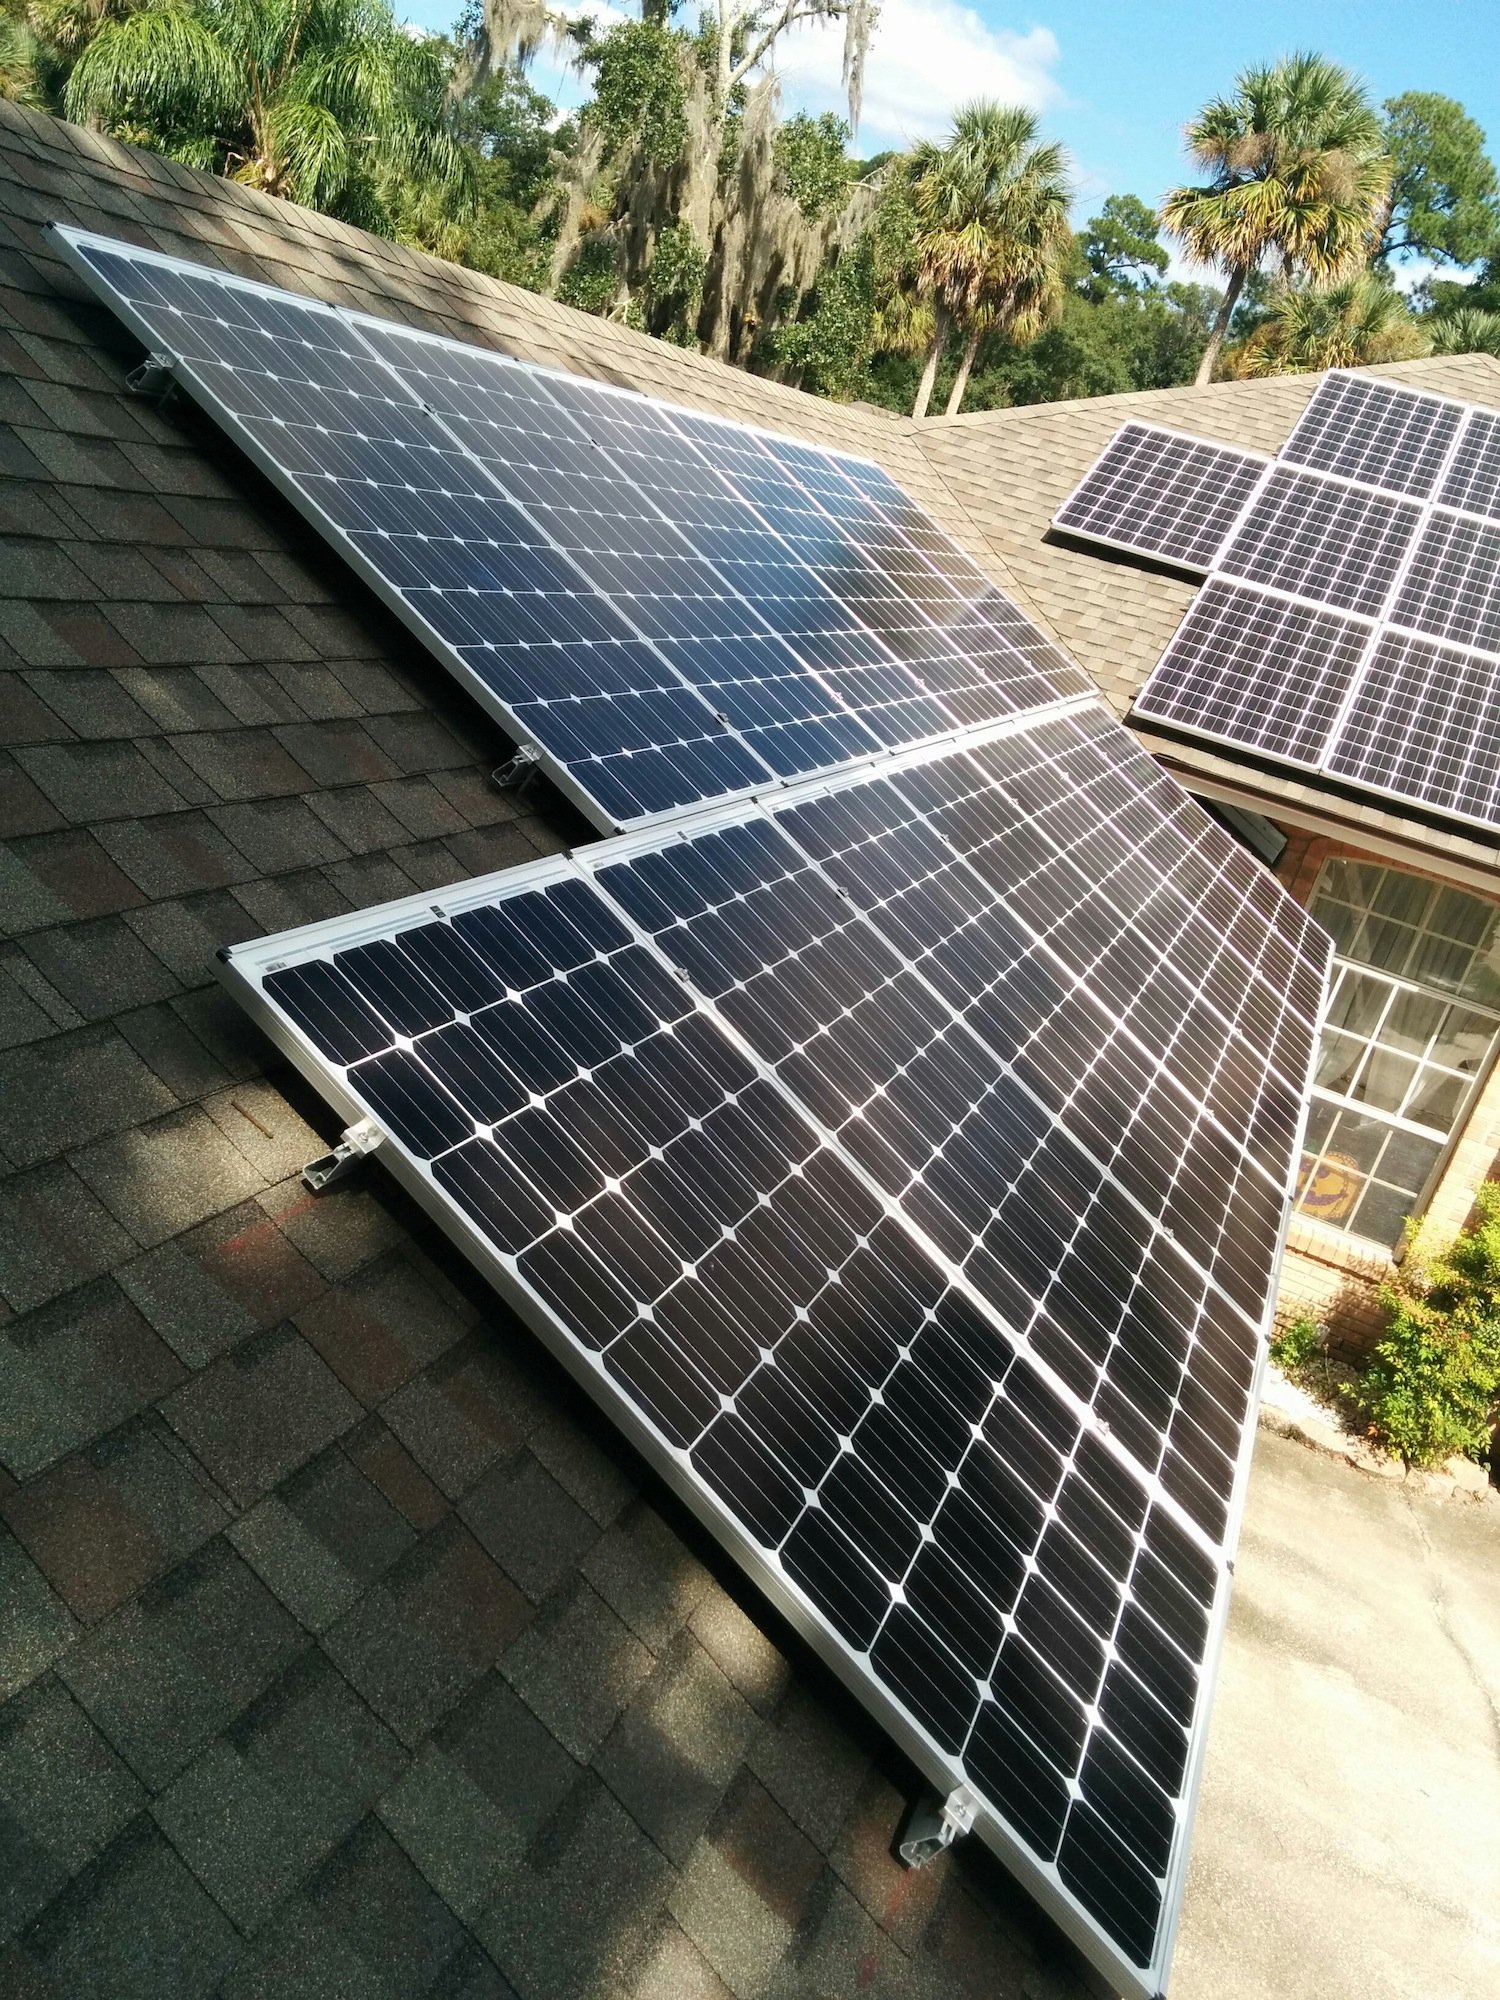 How Many Solar Panels Do I Need to Become Energy Independent?